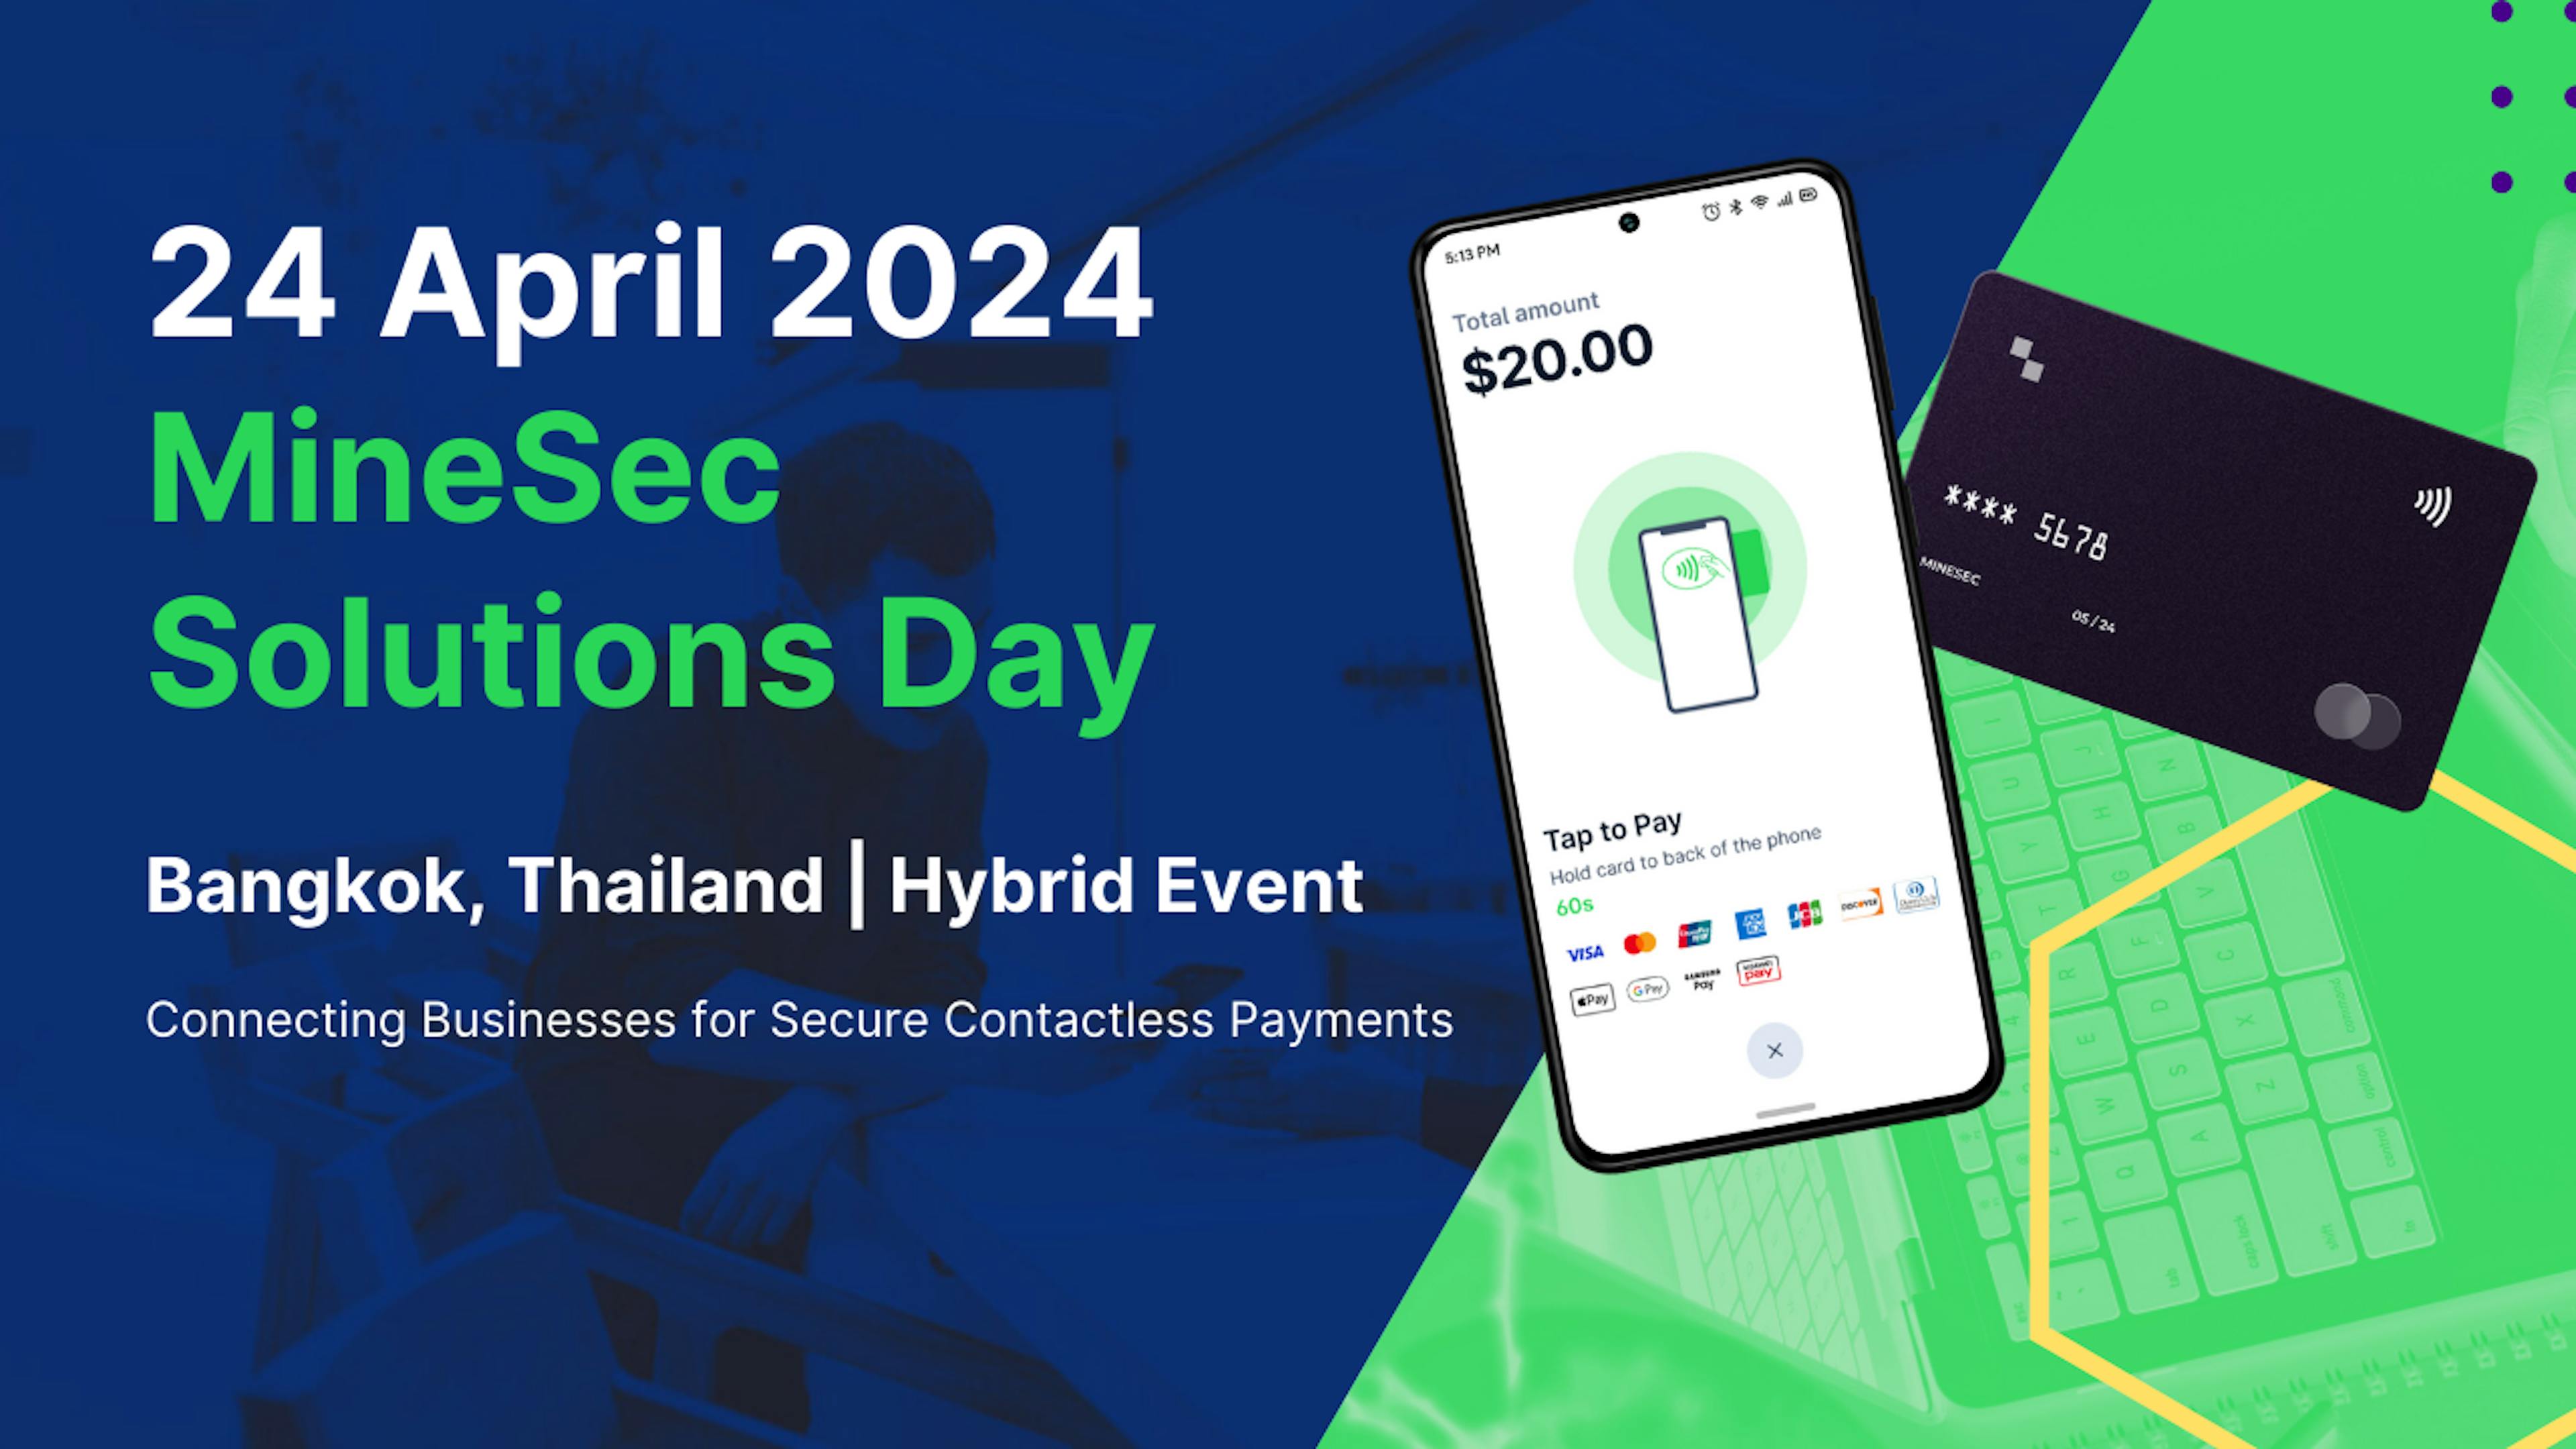 minesec solutions day hybrid event promotion banner